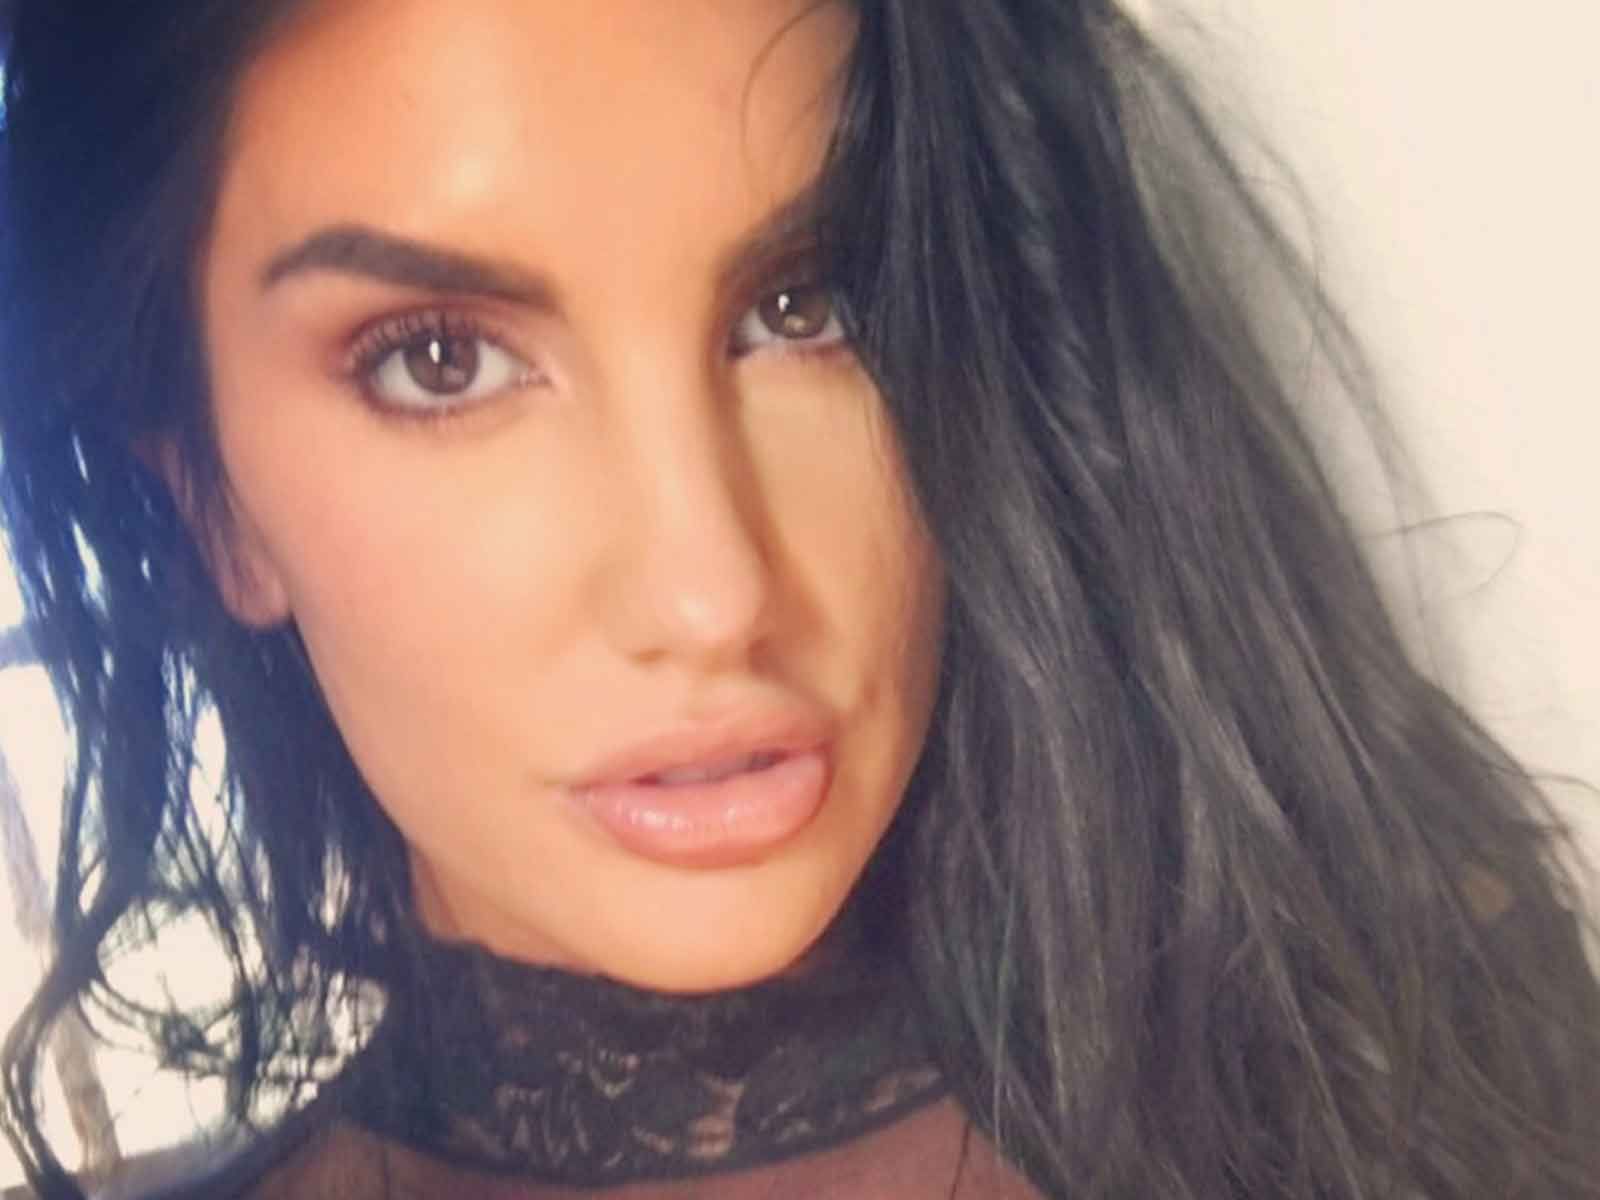 Male Porn Star Accused of Cyberbullying August Ames Speaks Out